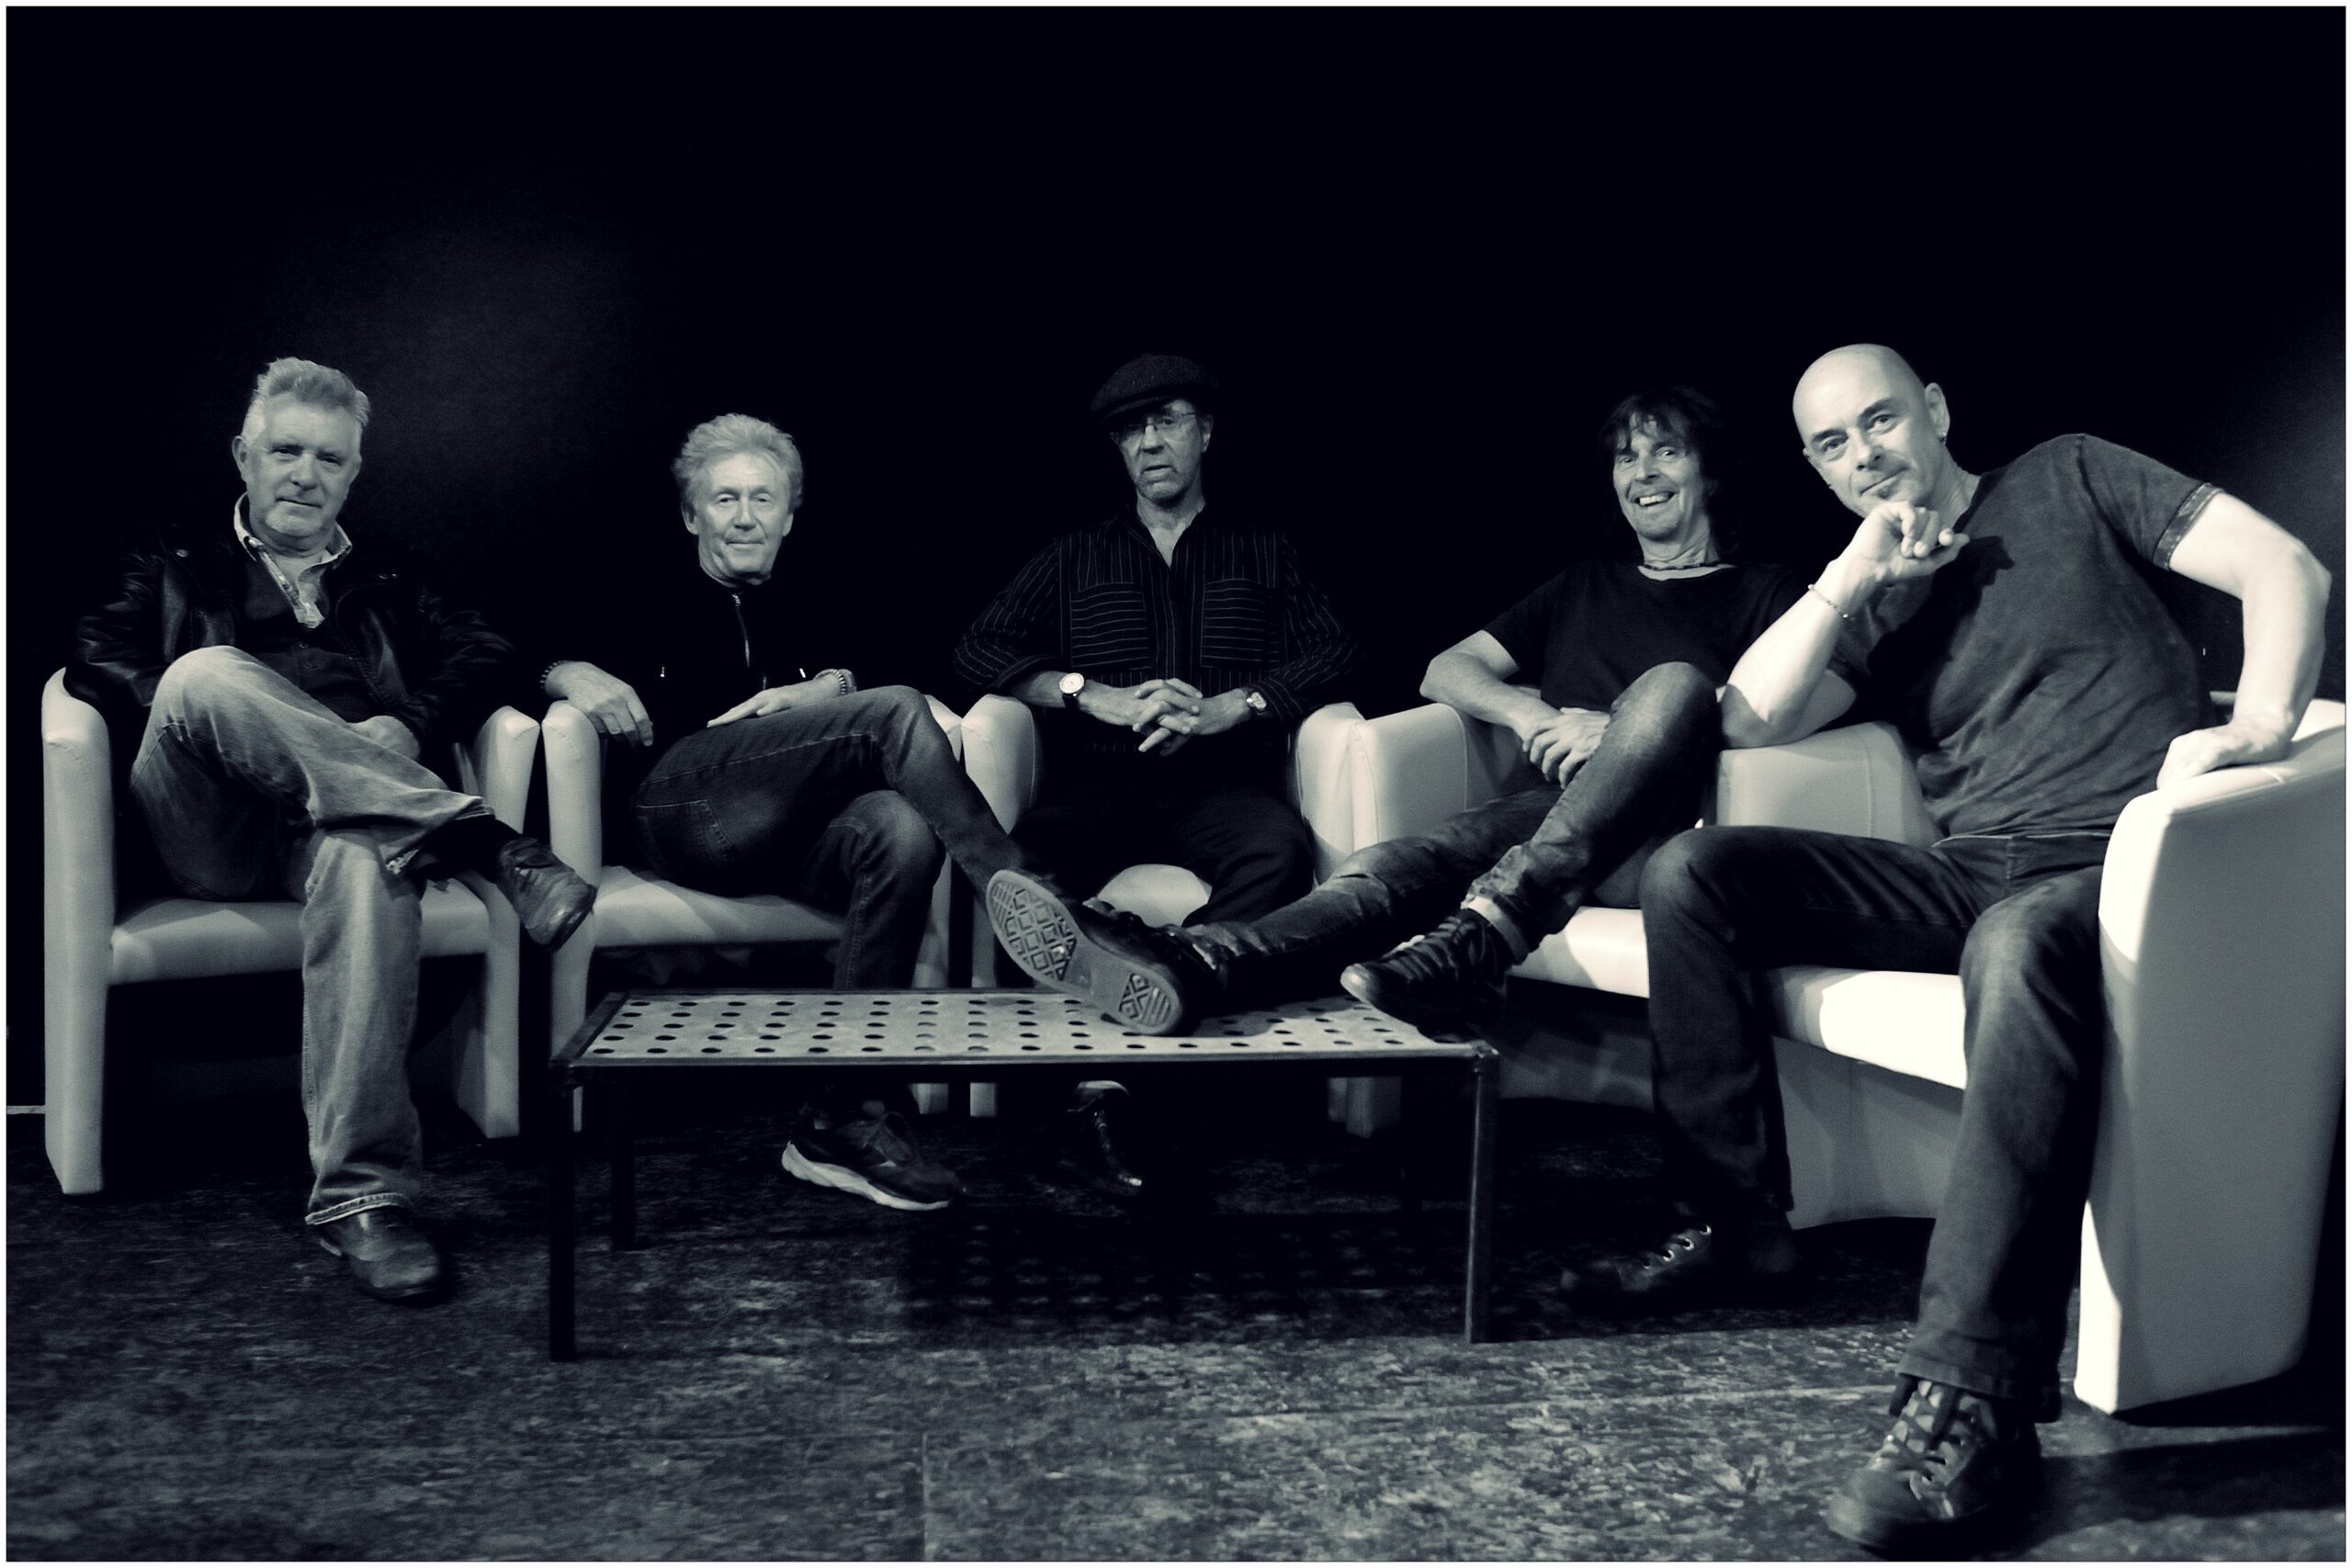 manfred mann's earth band uk tour dates